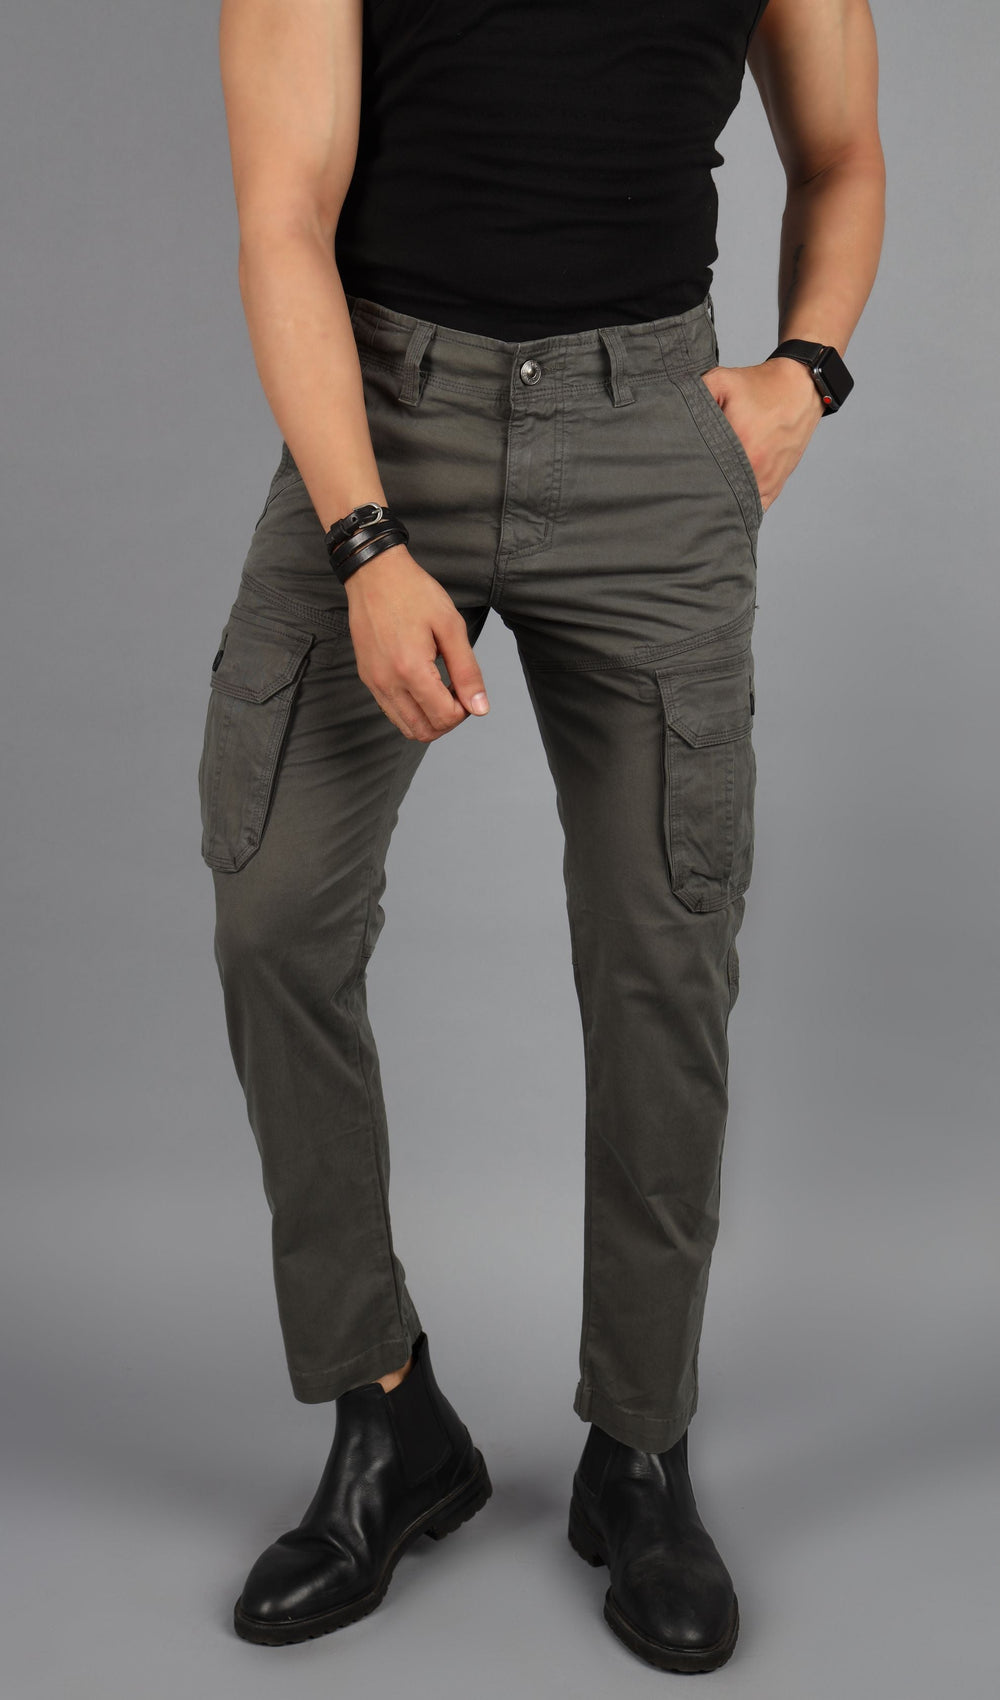 Plain Slim Fit Cargo Joggers Jeans at Rs 450/piece in New Delhi